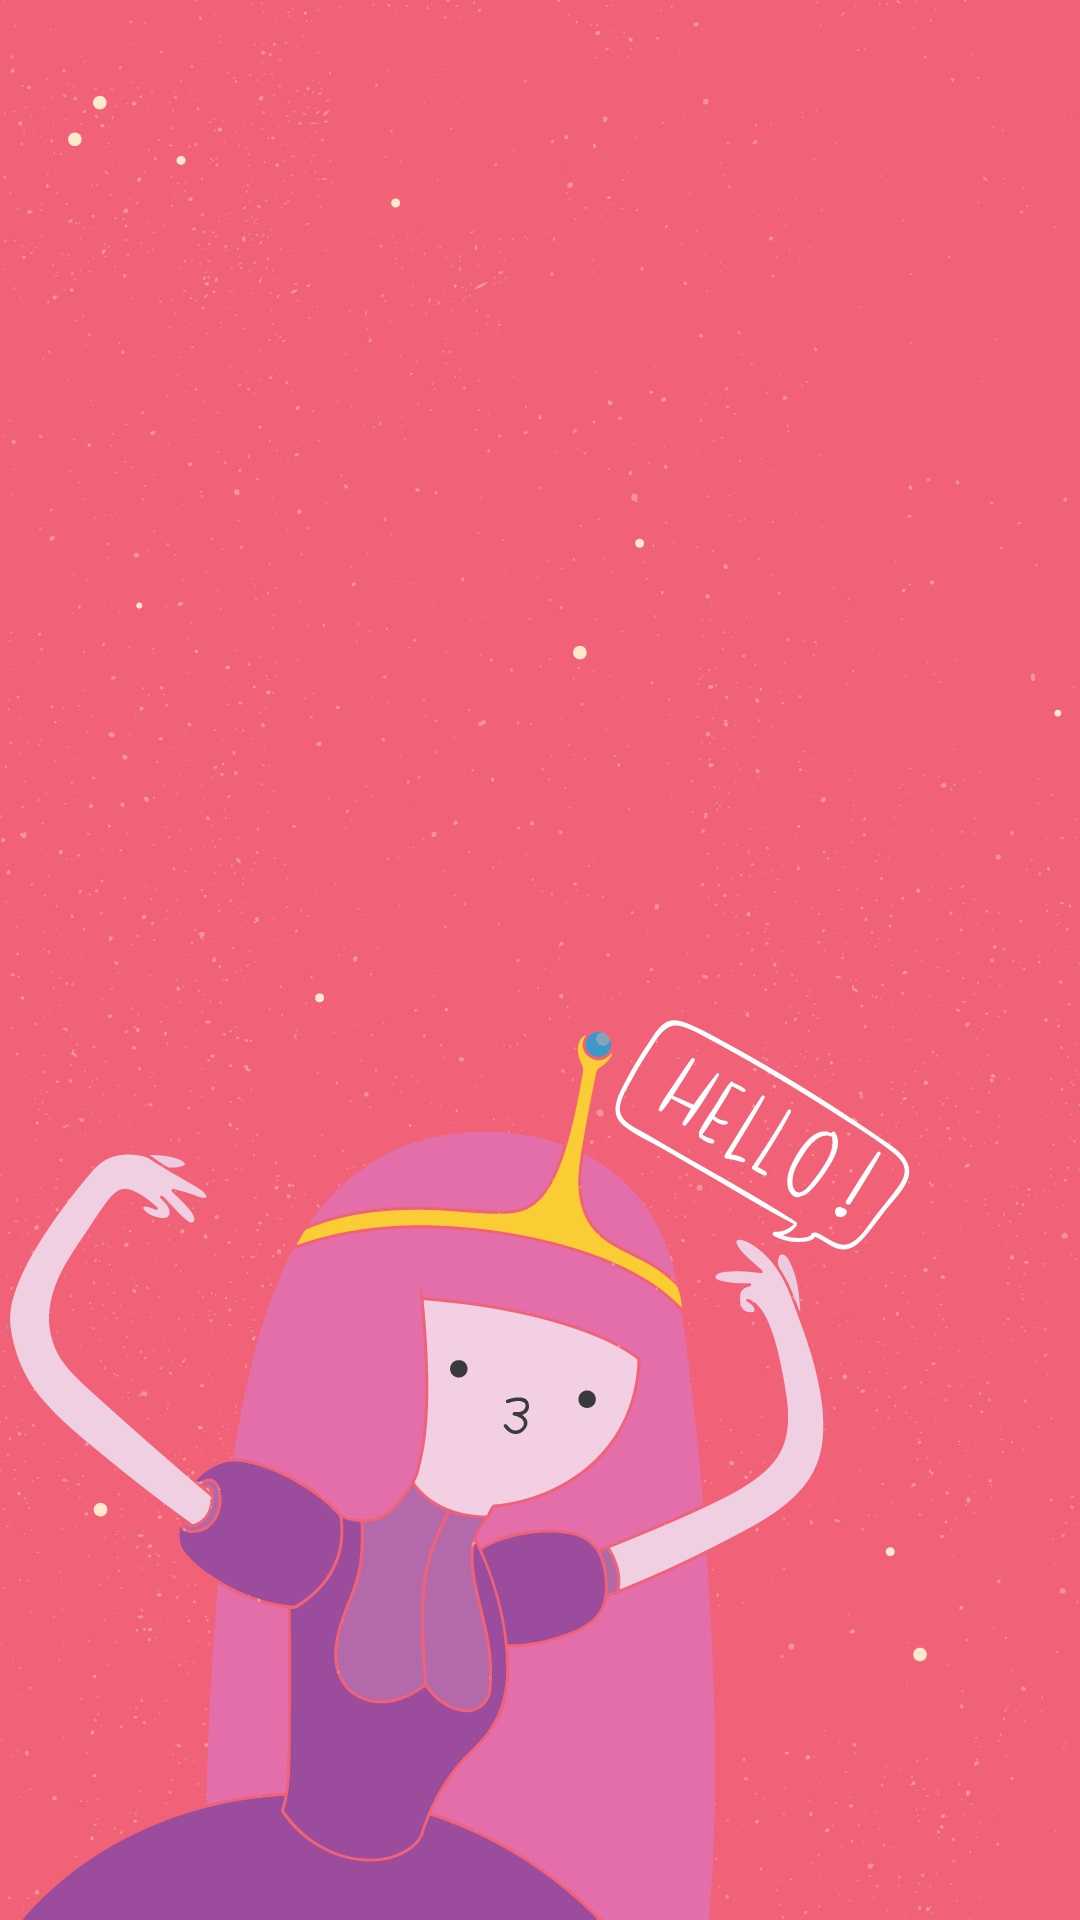 Princess Bubblegum Adventure Time iPhone Wallpaper with high-resolution 1080x1920 pixel. You can use this wallpaper for your iPhone 5, 6, 7, 8, X, XS, XR backgrounds, Mobile Screensaver, or iPad Lock Screen - Adventure Time